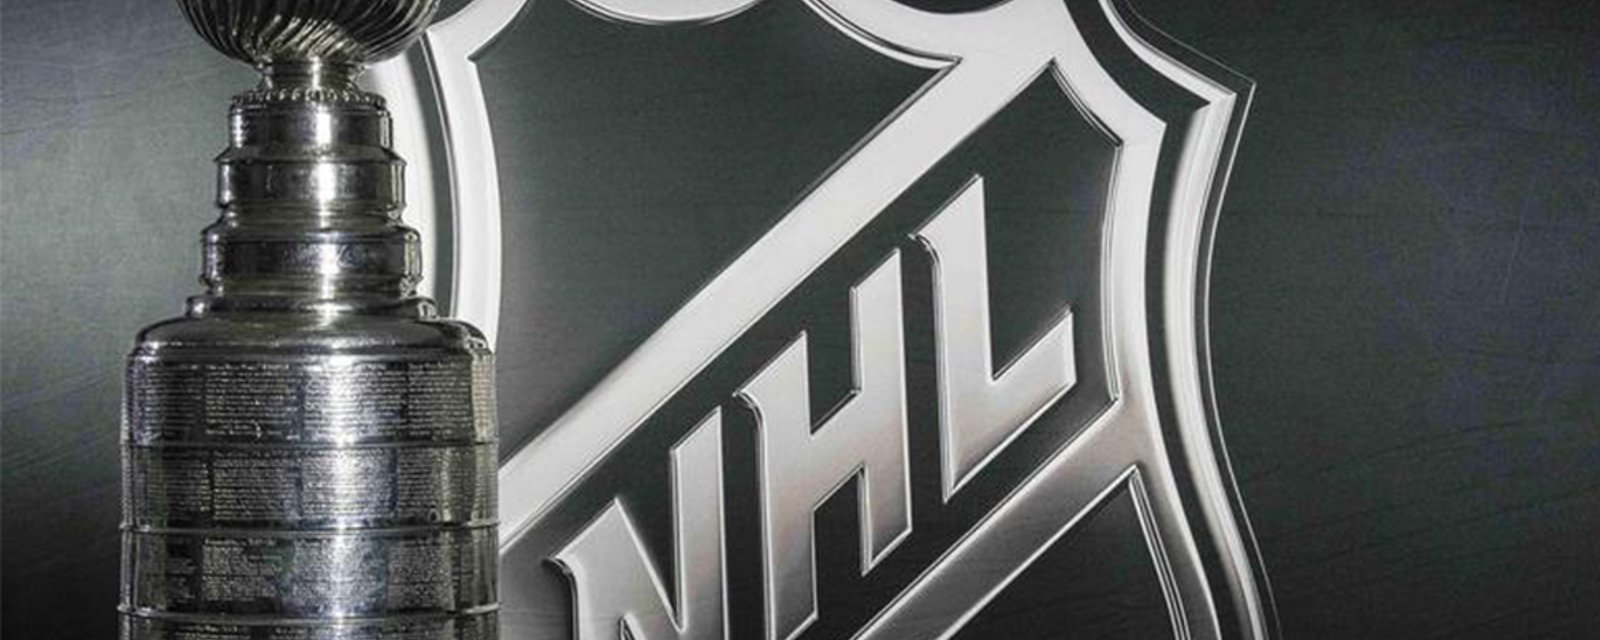 NHL makes drastic change of plans for European/foreign players.